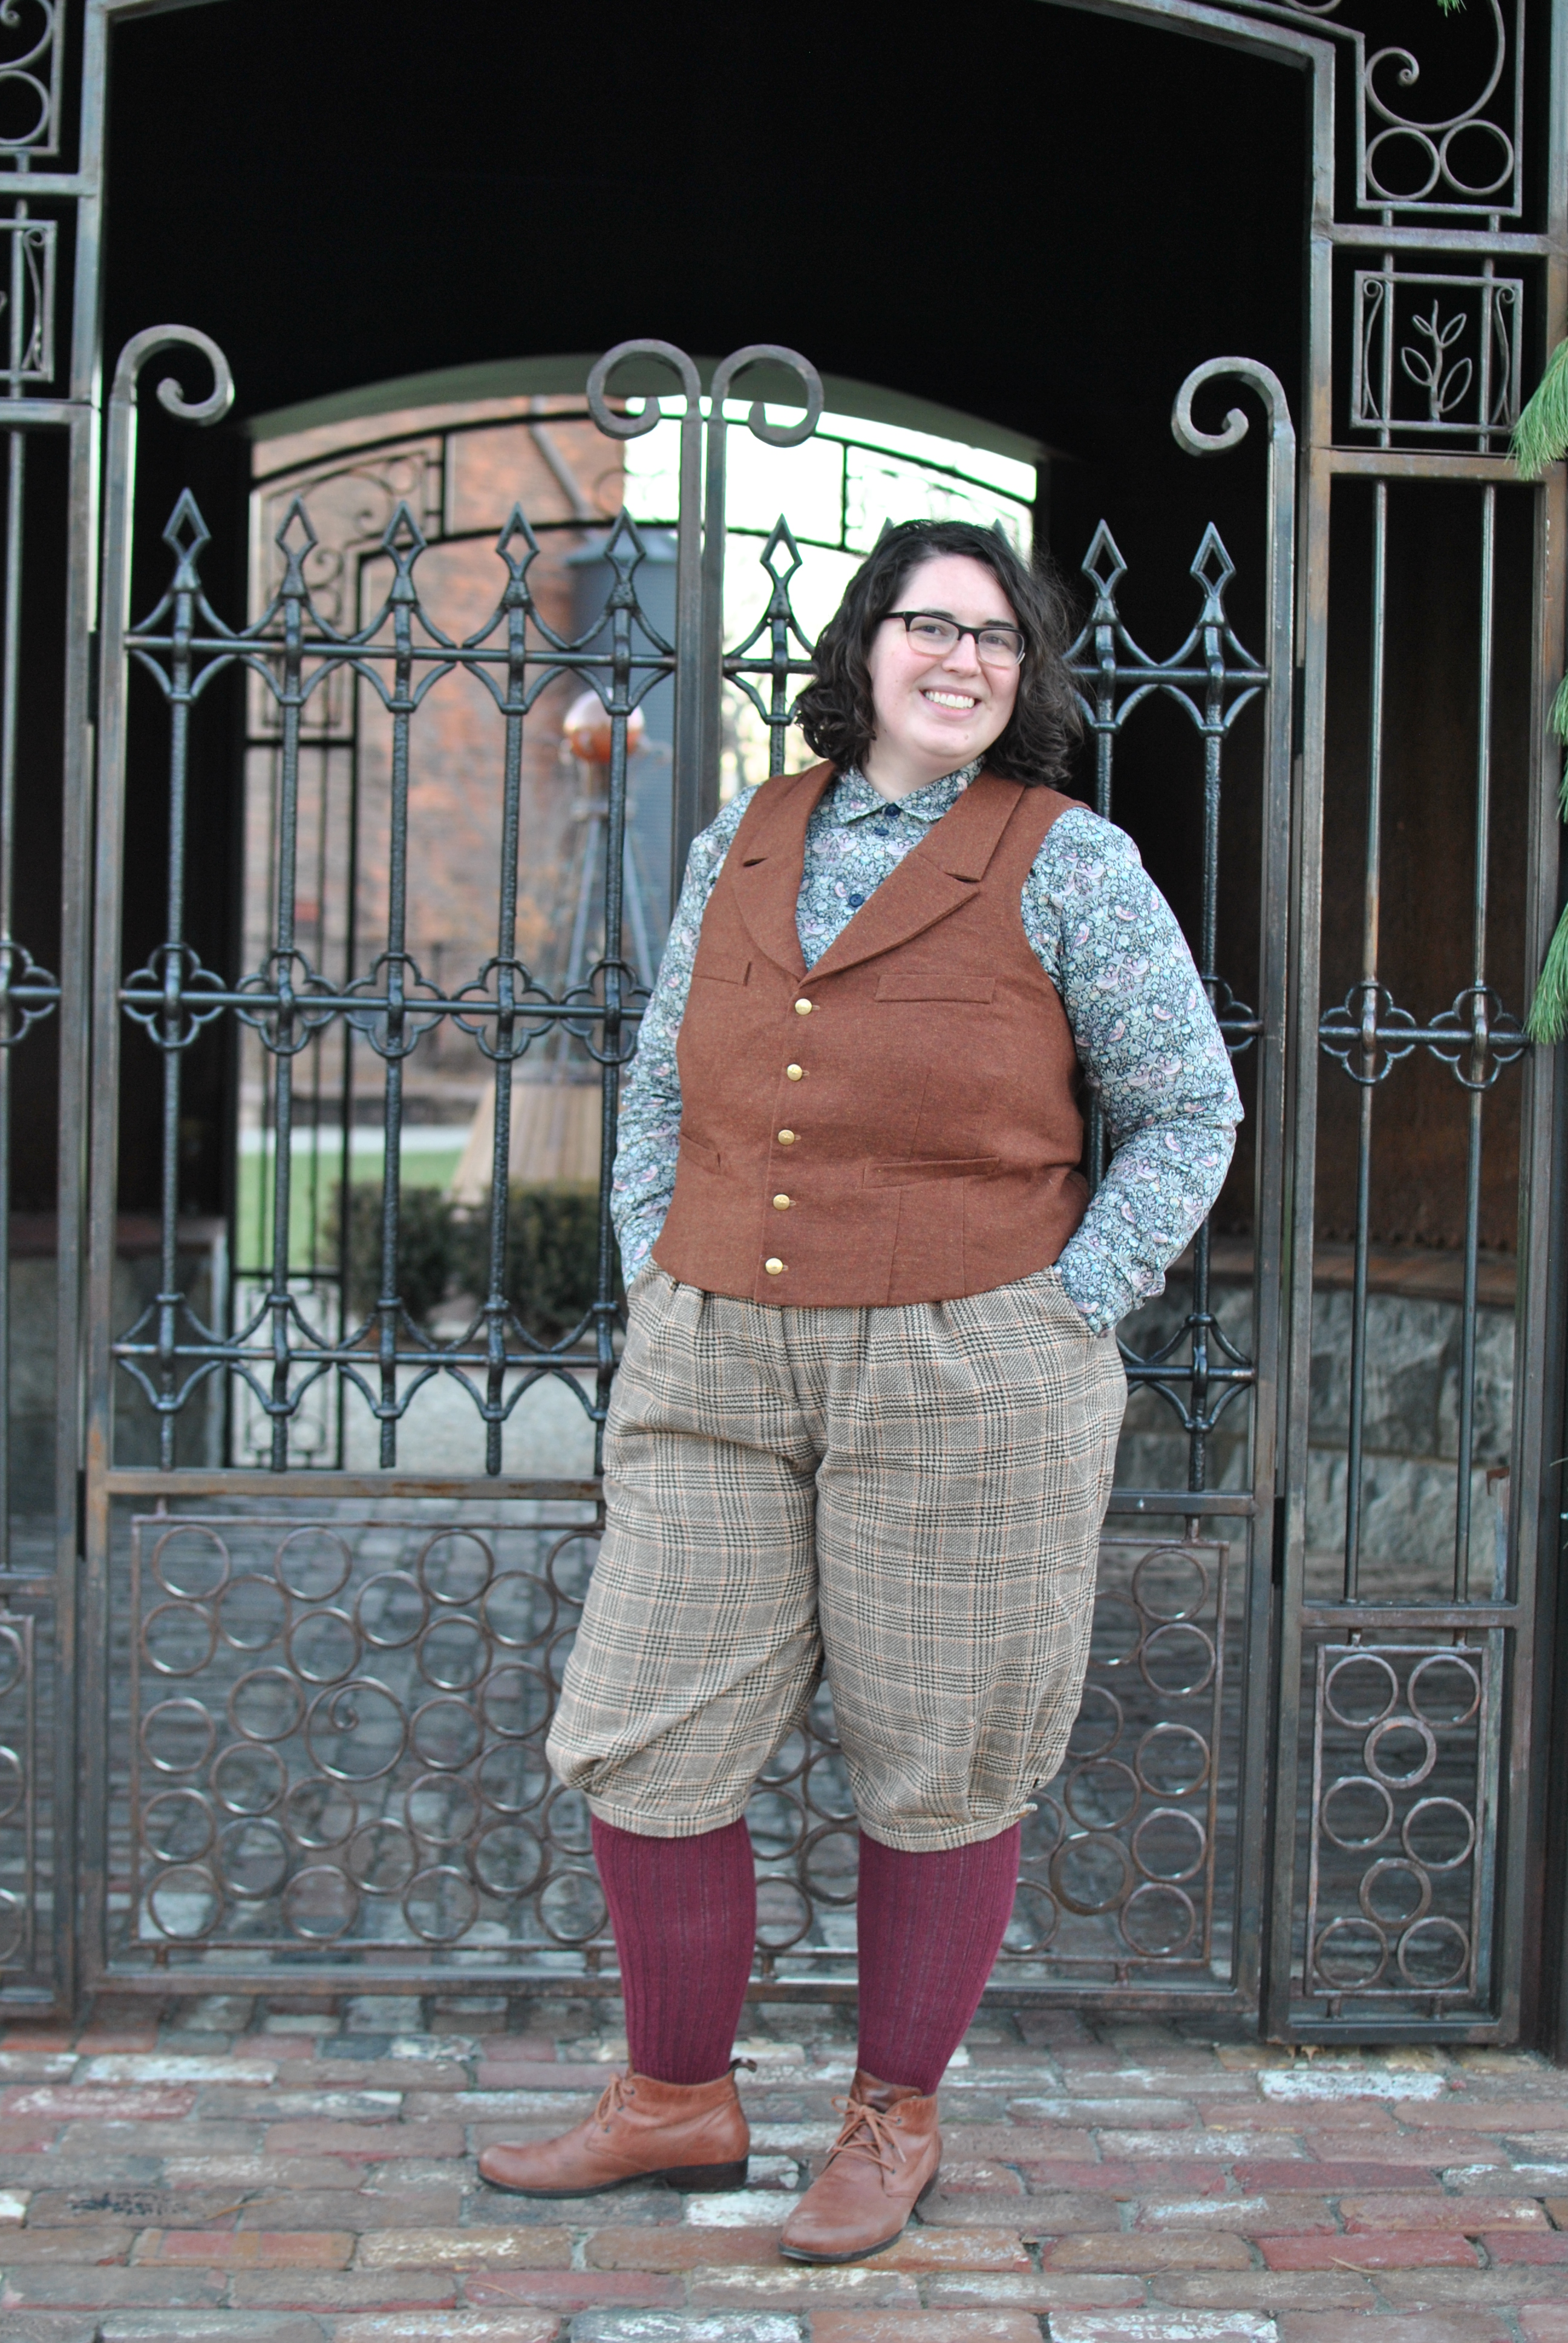 Shannon standing outdoors in front of an iron gate, wearing plaid knickerbockers, a rust wool vest, and a patterned shirt.